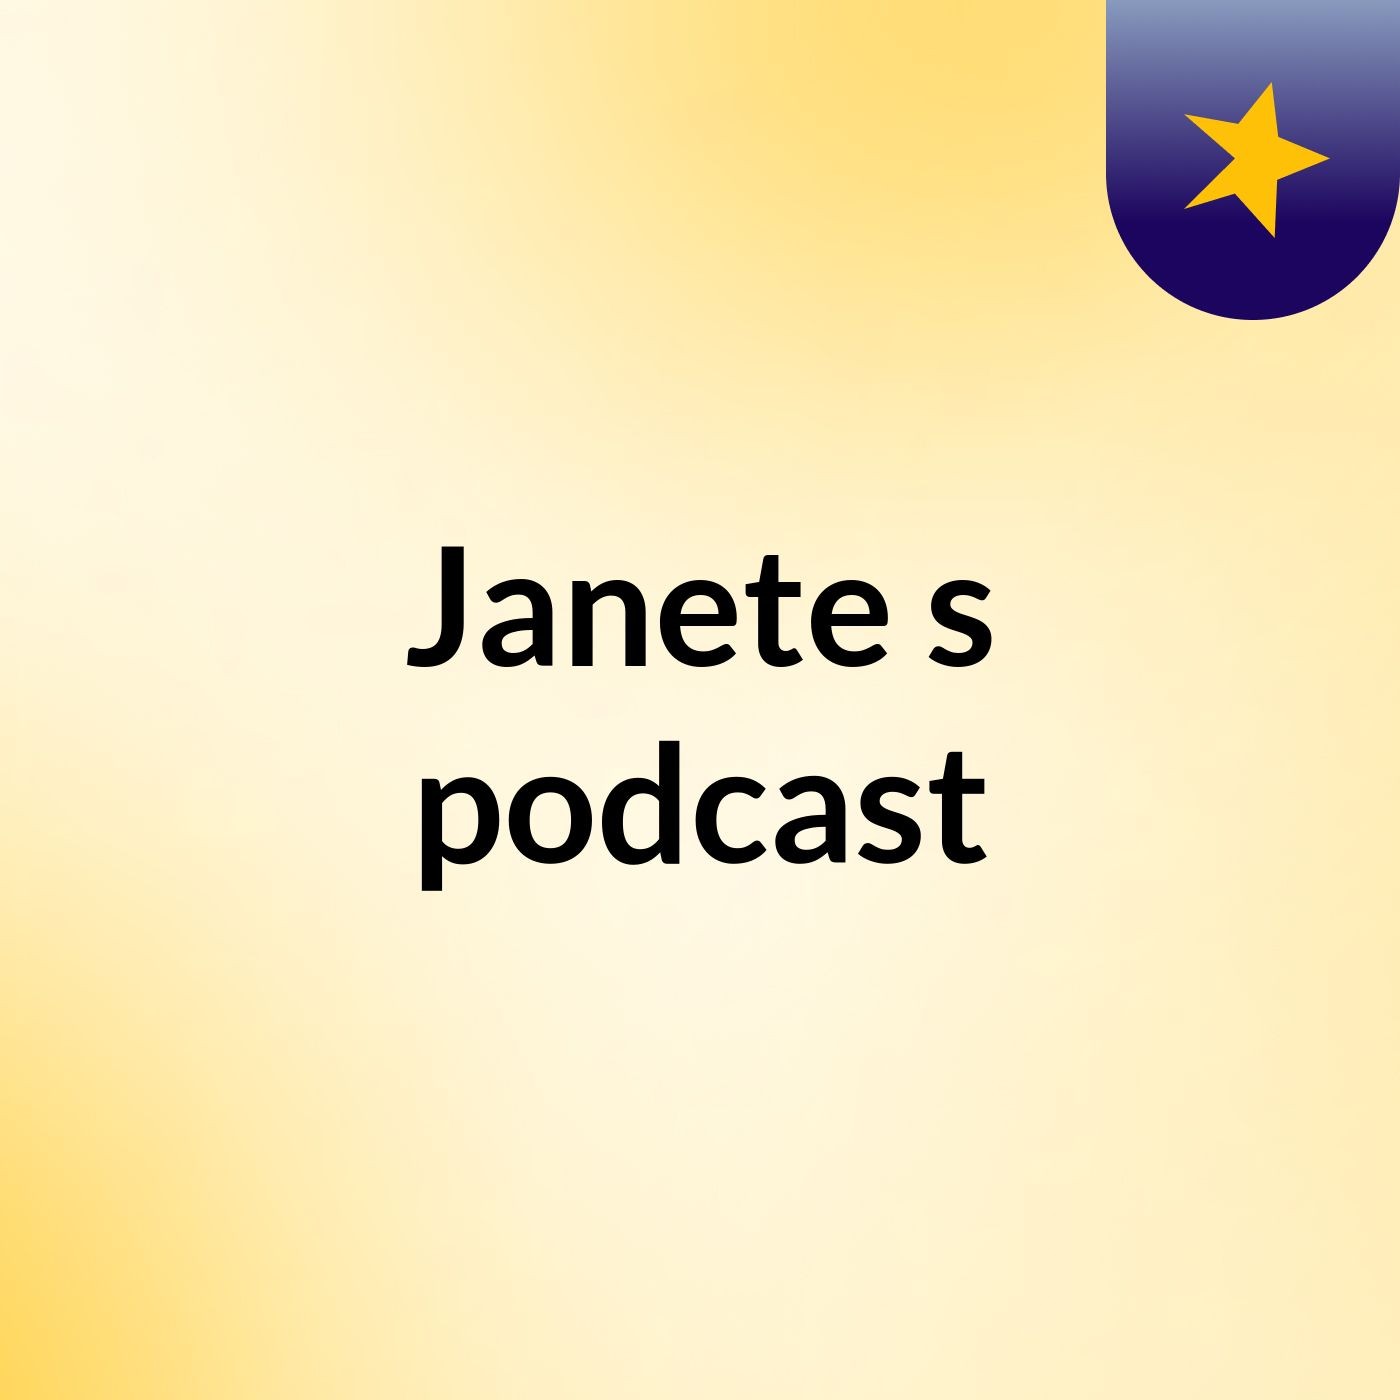 Janete's podcast